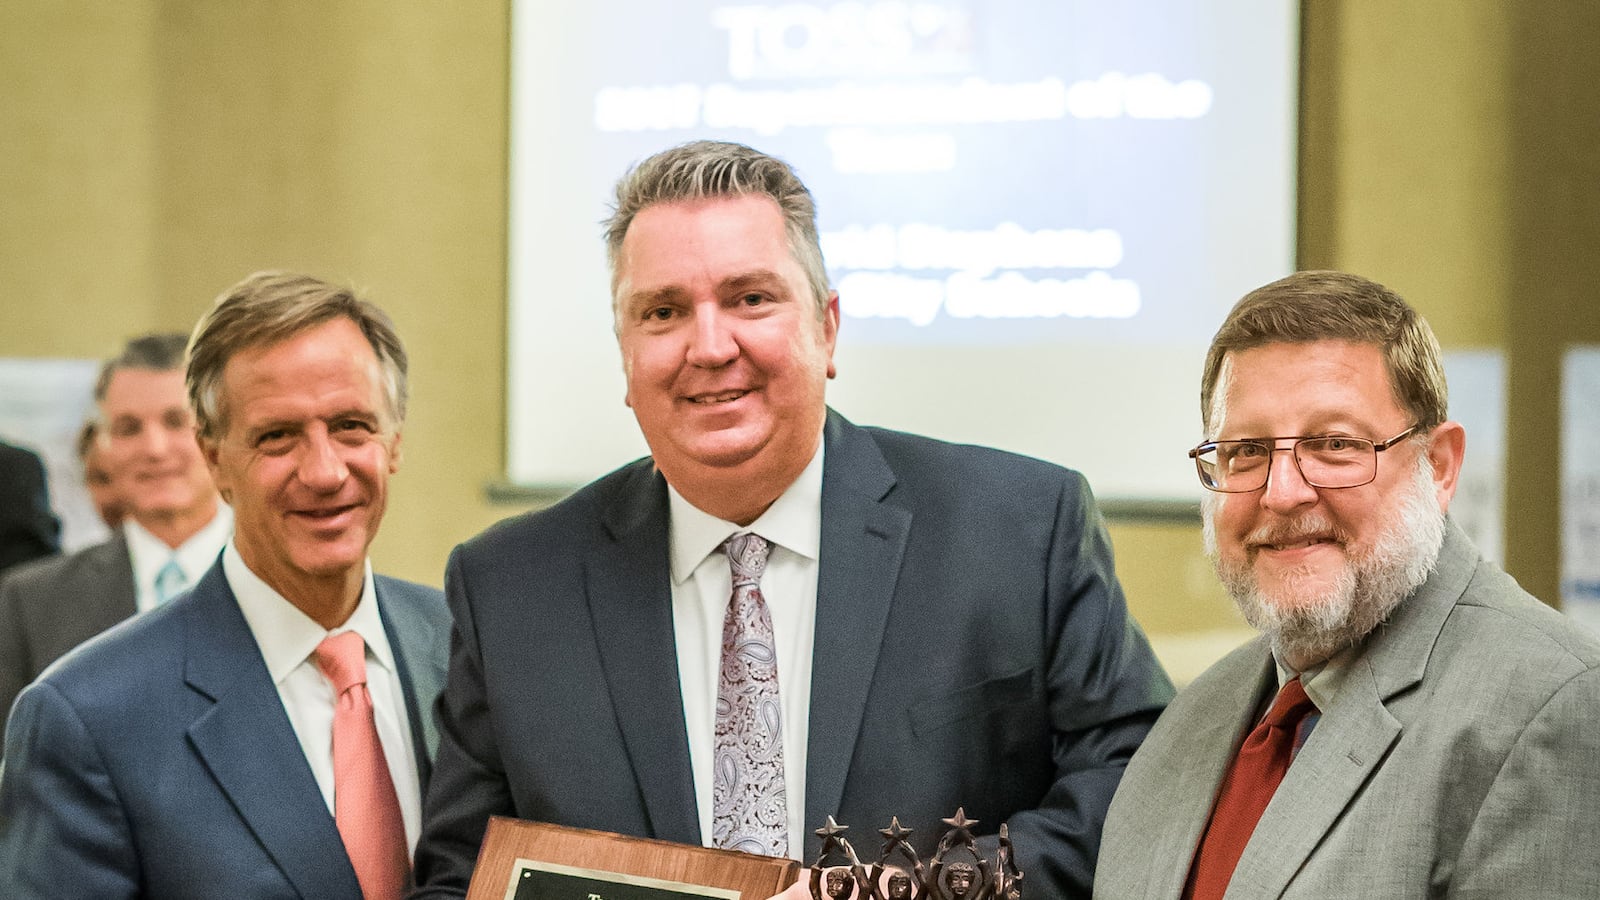 Bartlett City Schools Superintendent David Stephens (center) receives Tennessee's Superintendent of the Year award from Gov. Bill Haslam and Wayne Miller, executive director of the Tennessee Organization of School Superintendents.